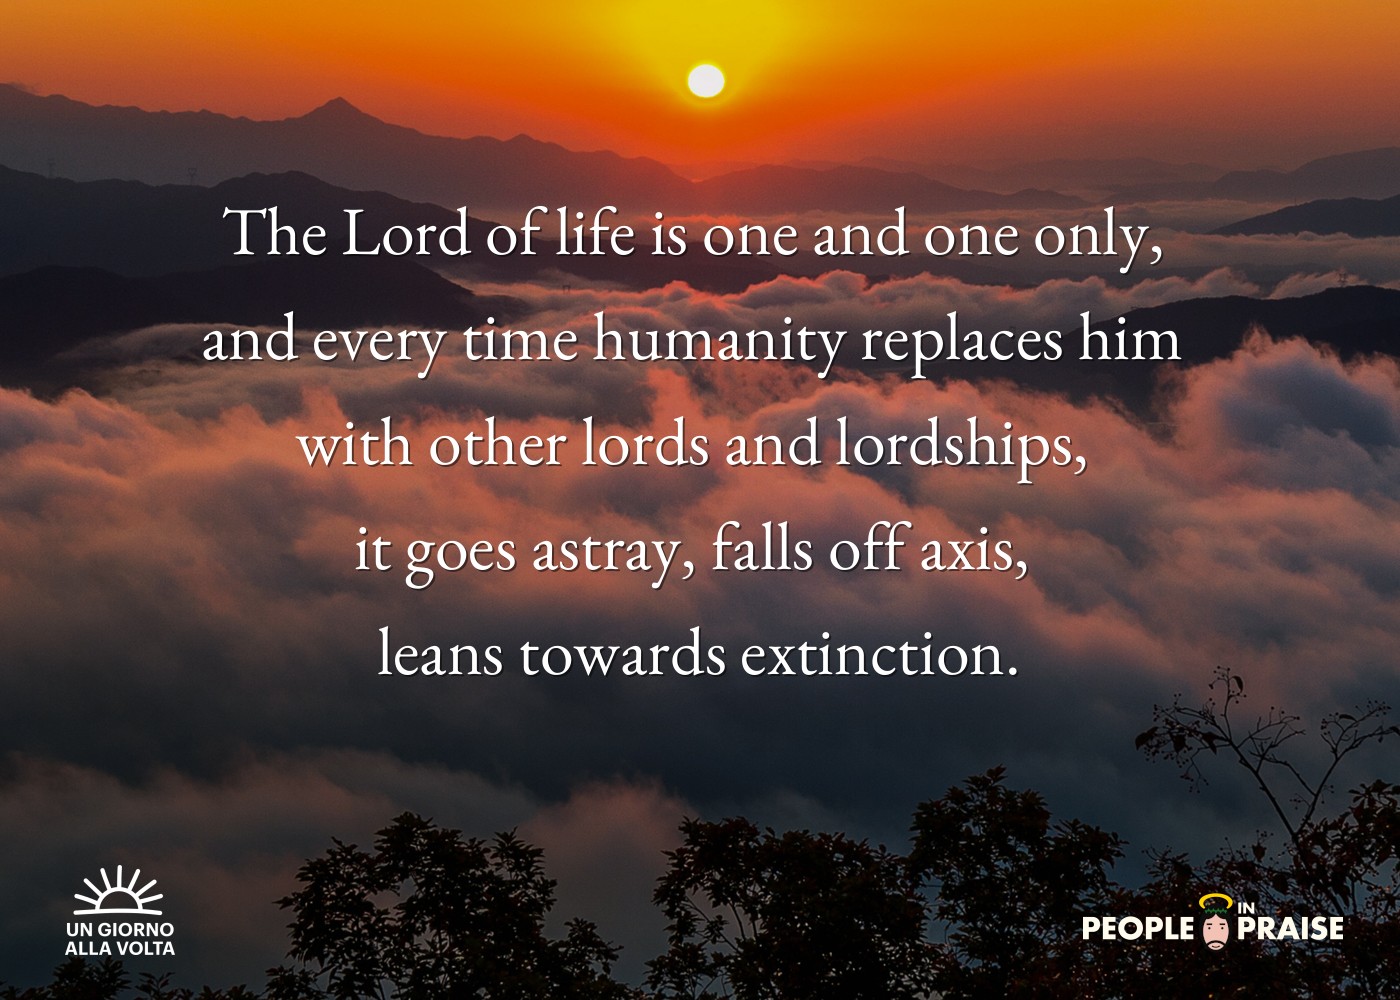 The Lord of life is one and one only, 
and every time humanity replaces him 
with other lords and lordships, 
it goes astray, falls off axis, 
leans towards extinction.
